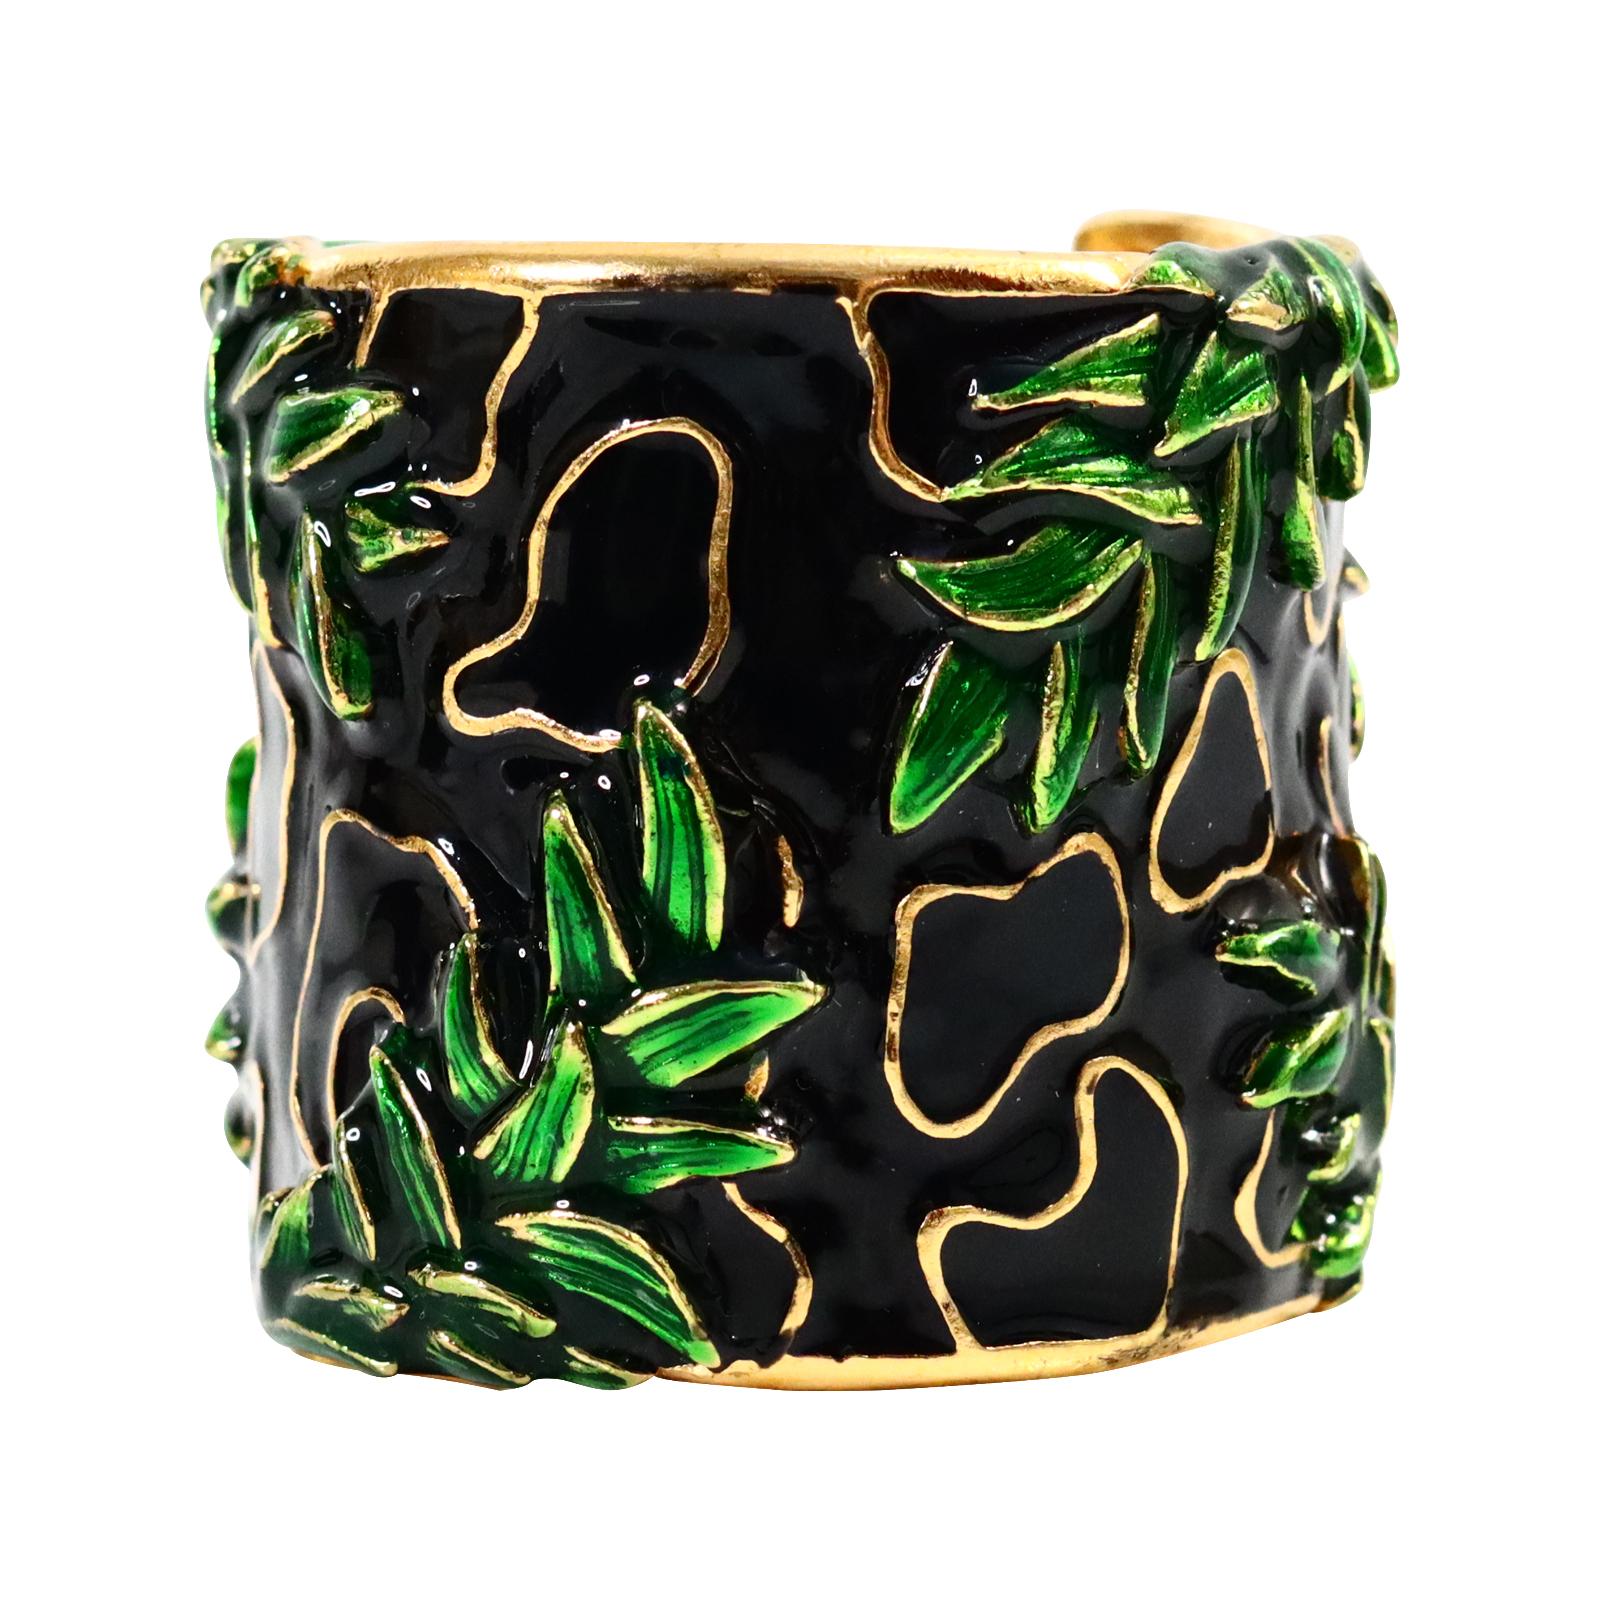  This gorgeous Vintage Christian Dior Cuff bracelet fully covered with green black and gold enamel has see through cloisonné showing through bamboo leaves on a black background.  This is during the Gianfranco Ferre design era of Christian Dior Circa